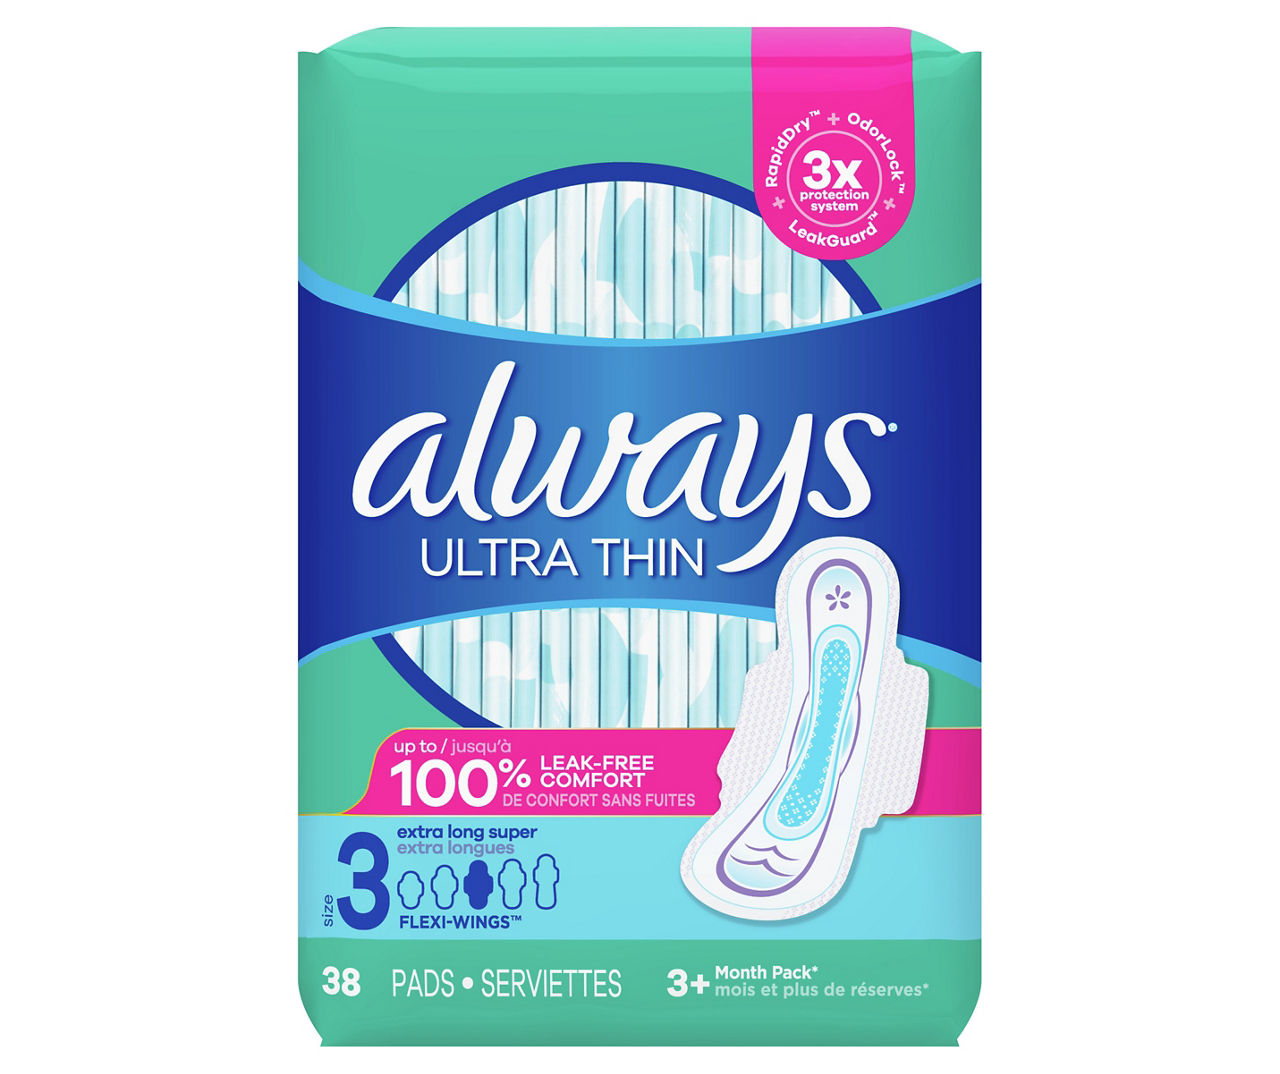 Always Infinity Feminine Pads For Women, Size 5 Extra Heavy Overnight  Absorbency, Multipack, With Flexfoam, With Wings, Unscented, 22 Count x 6  Packs